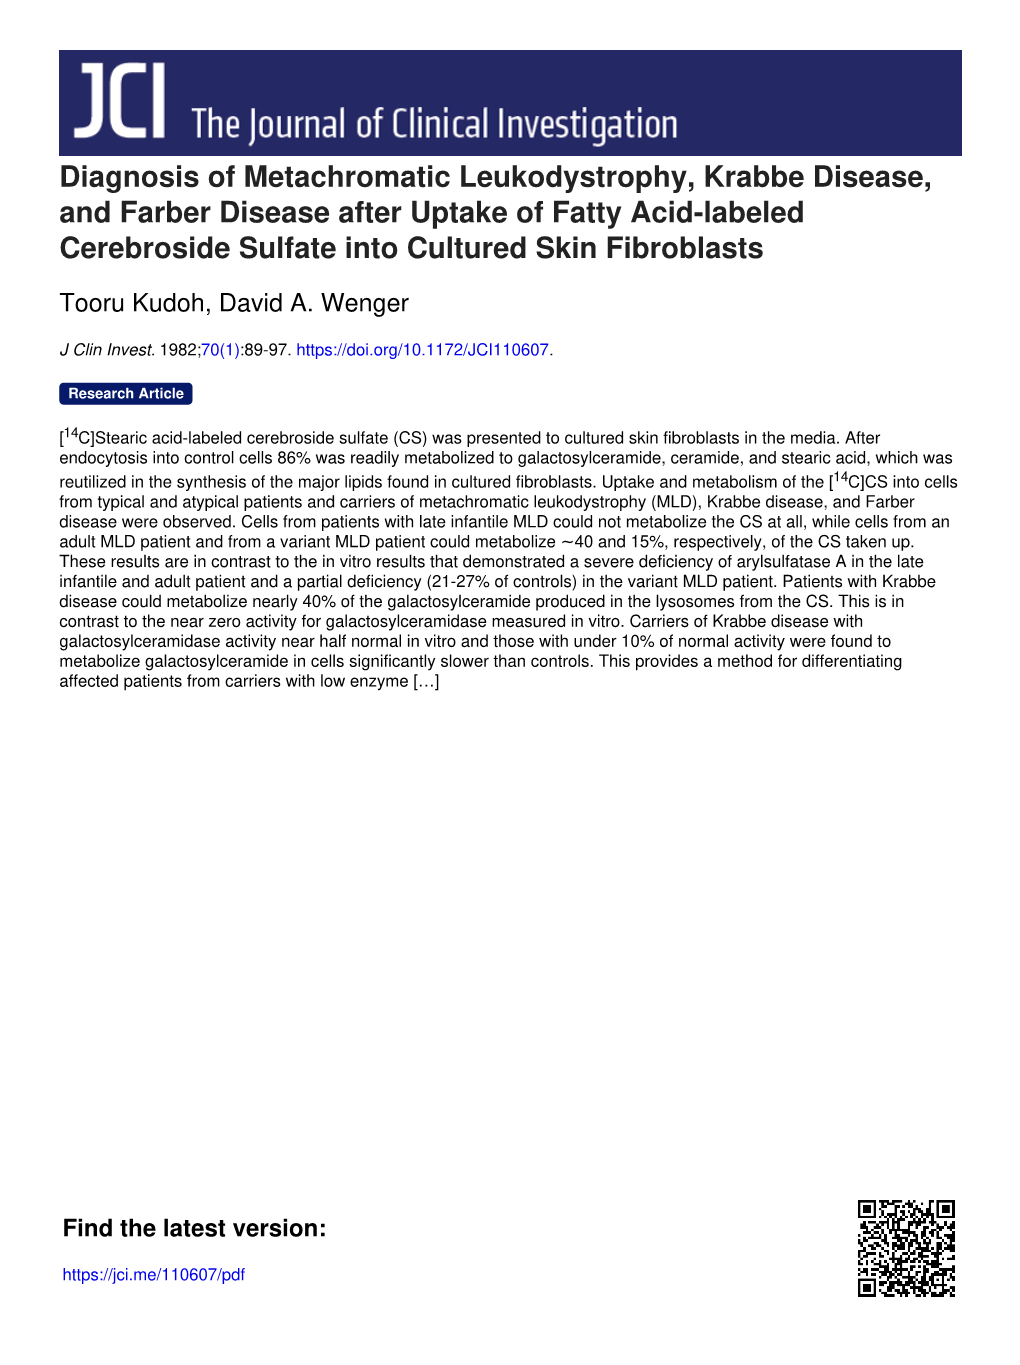 Diagnosis of Metachromatic Leukodystrophy, Krabbe Disease, and Farber Disease After Uptake of Fatty Acid-Labeled Cerebroside Sulfate Into Cultured Skin Fibroblasts